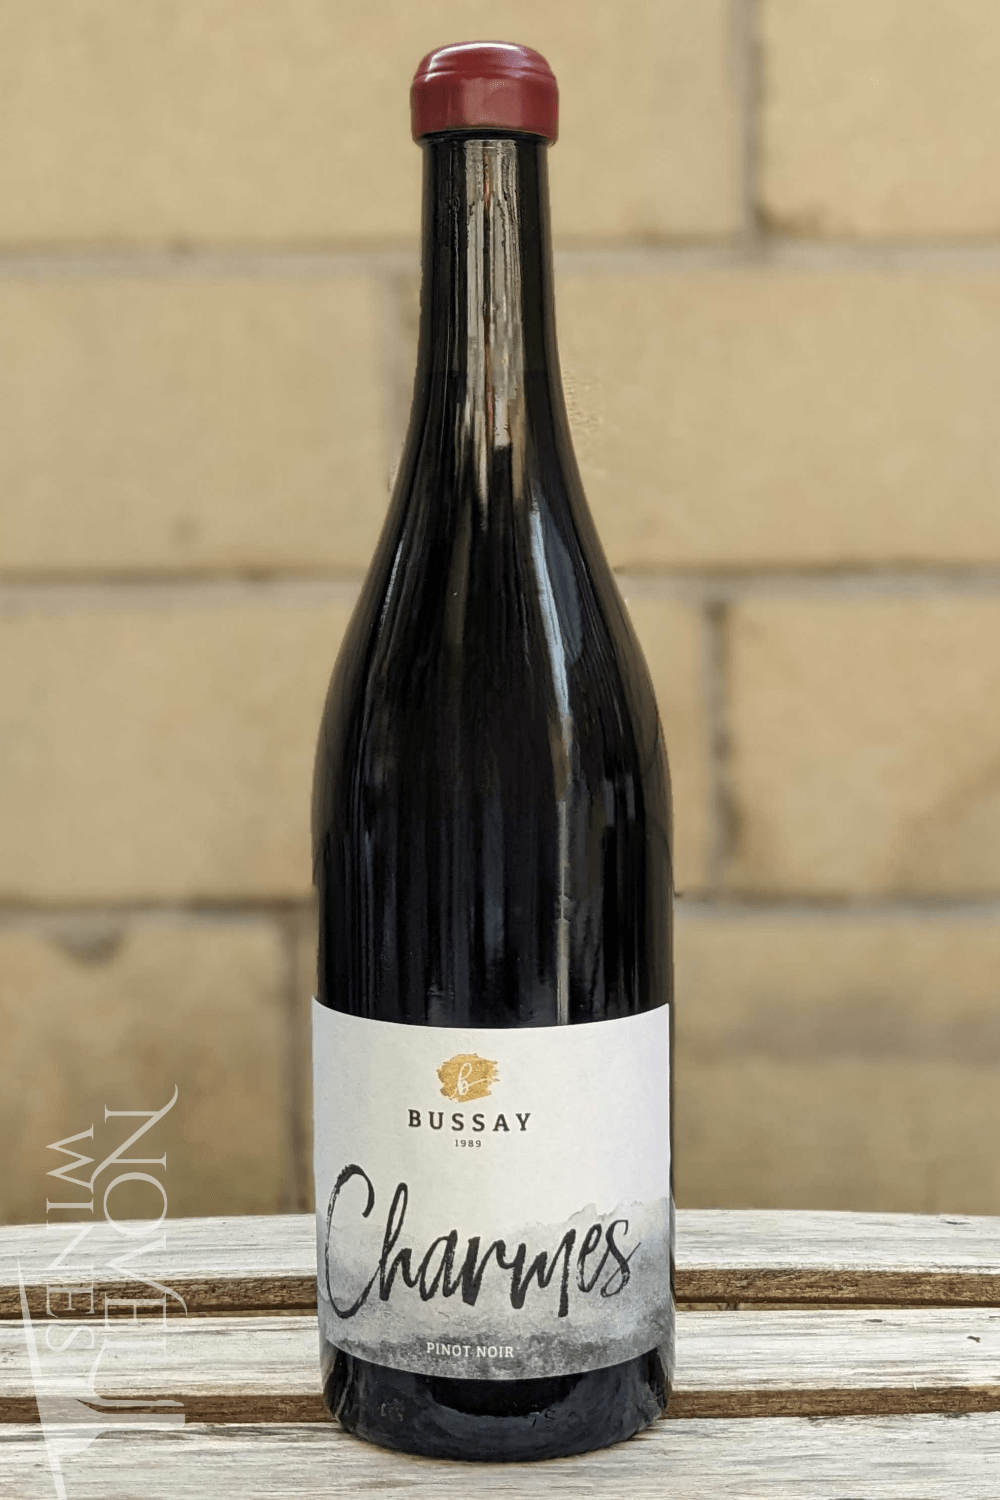 Bussay Red Wine Bussay Charmes Pinot Noir 2018, Hungary